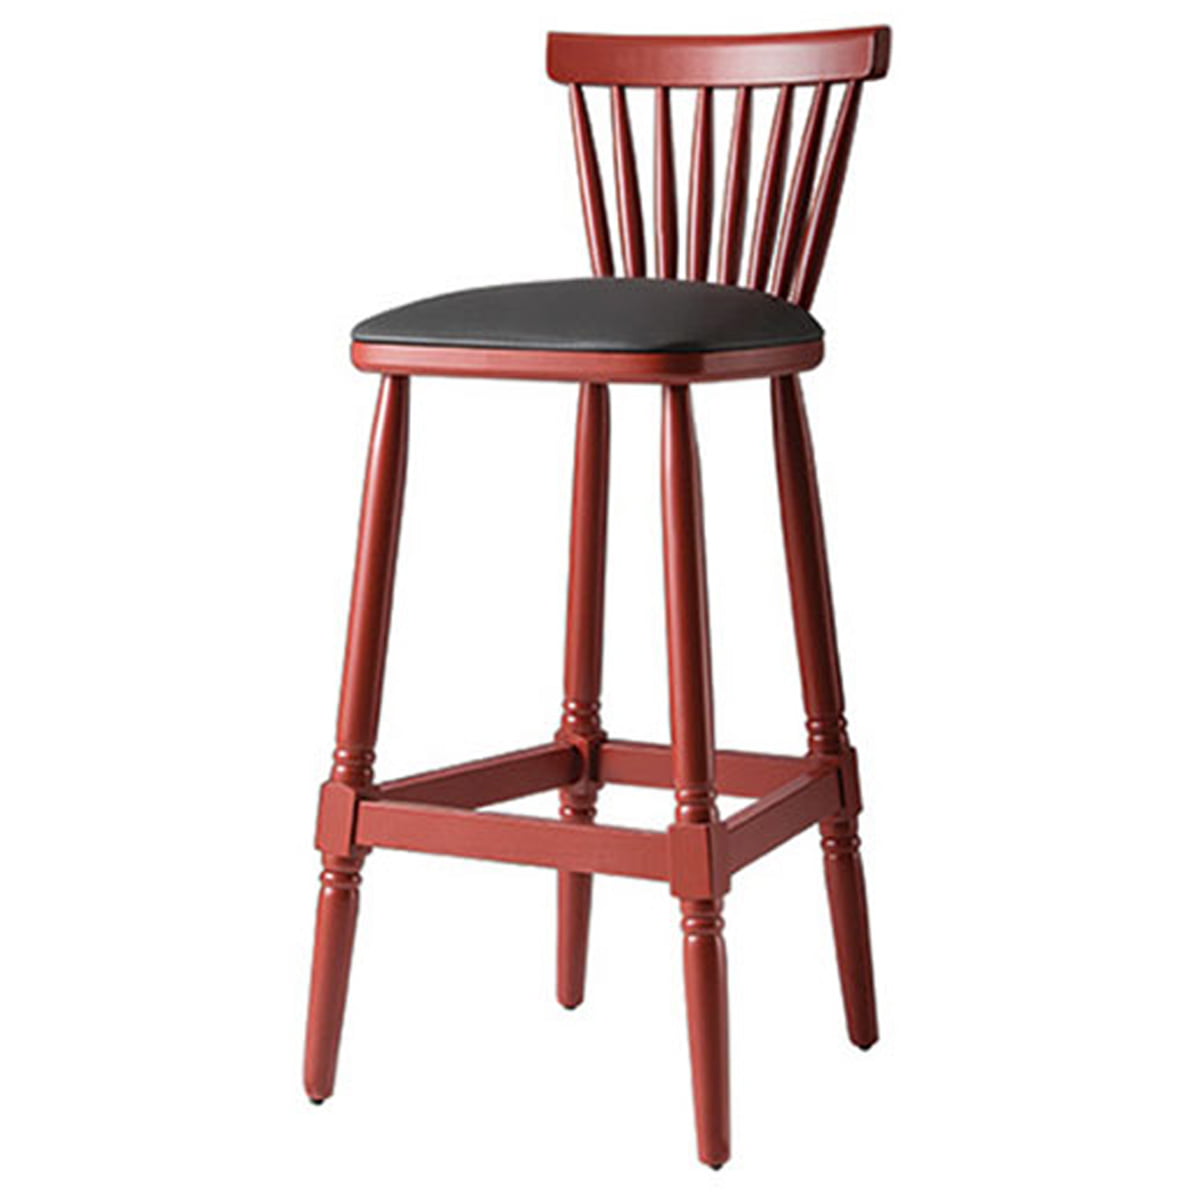 300386e Classic Wooden Bar Stool, Wooden Stool With Backrest